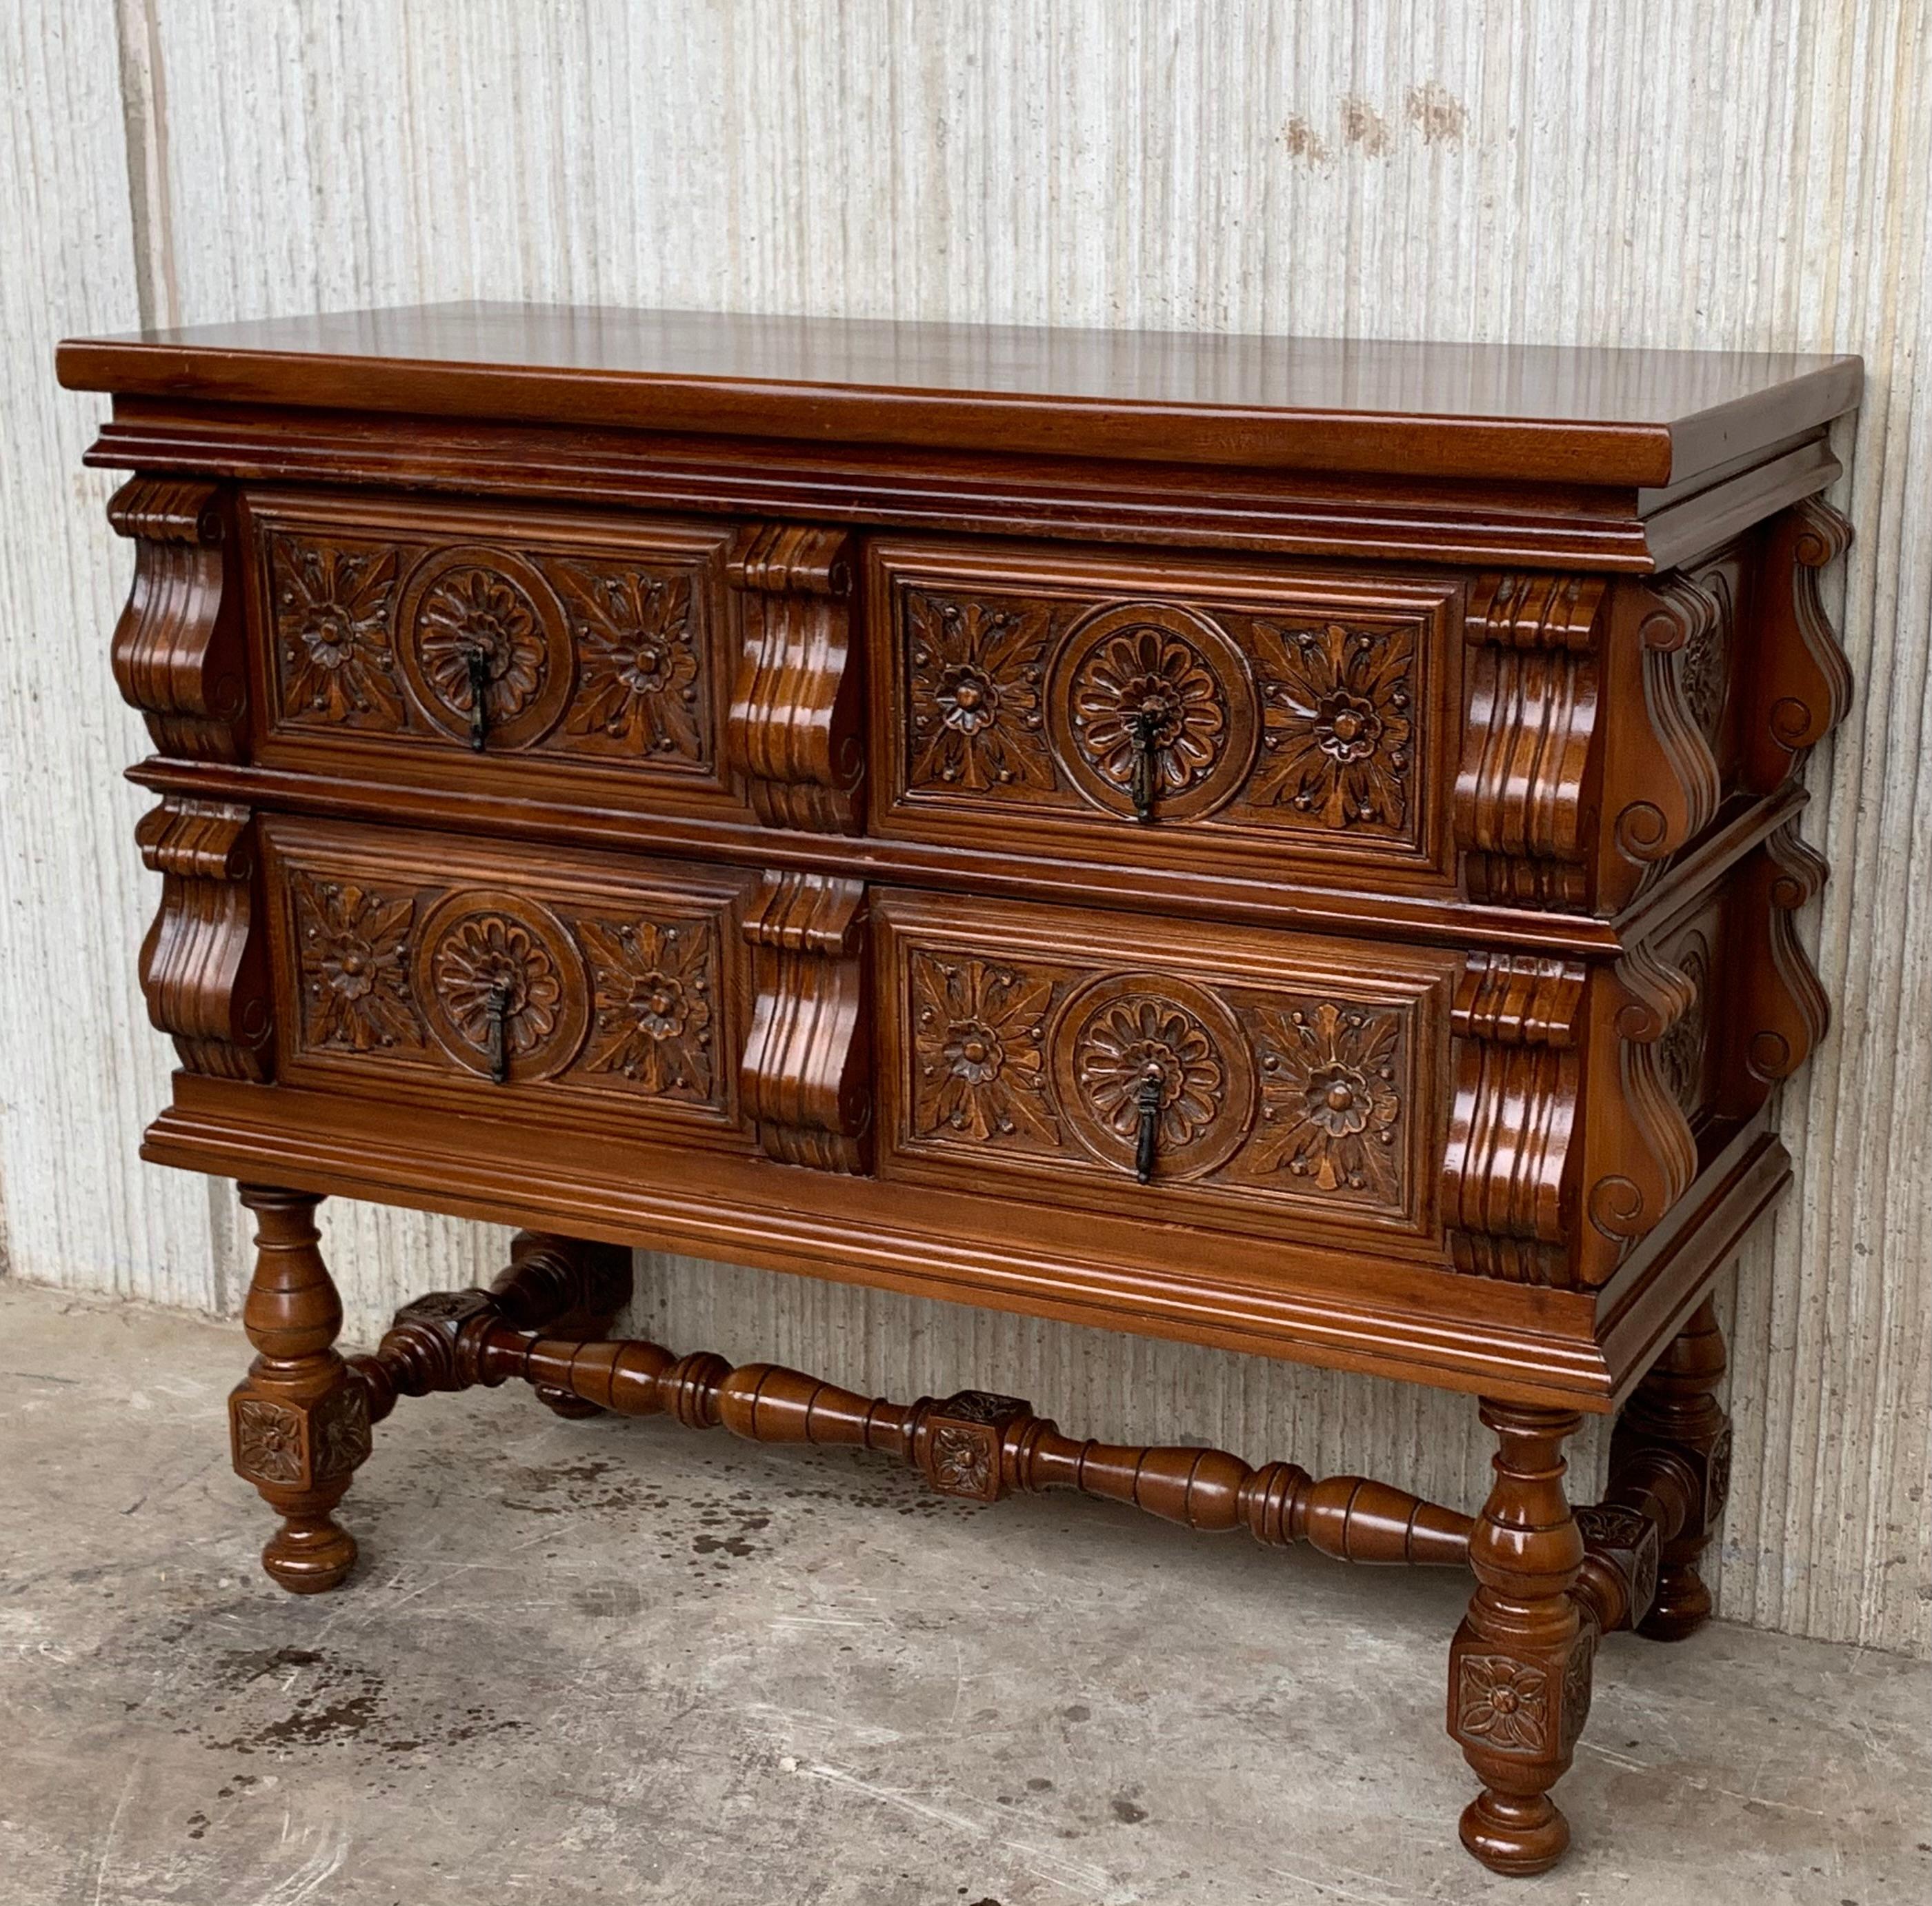 Renaissance 20th Spanish Chest of Drawers with Original Hardware and carved drawers For Sale